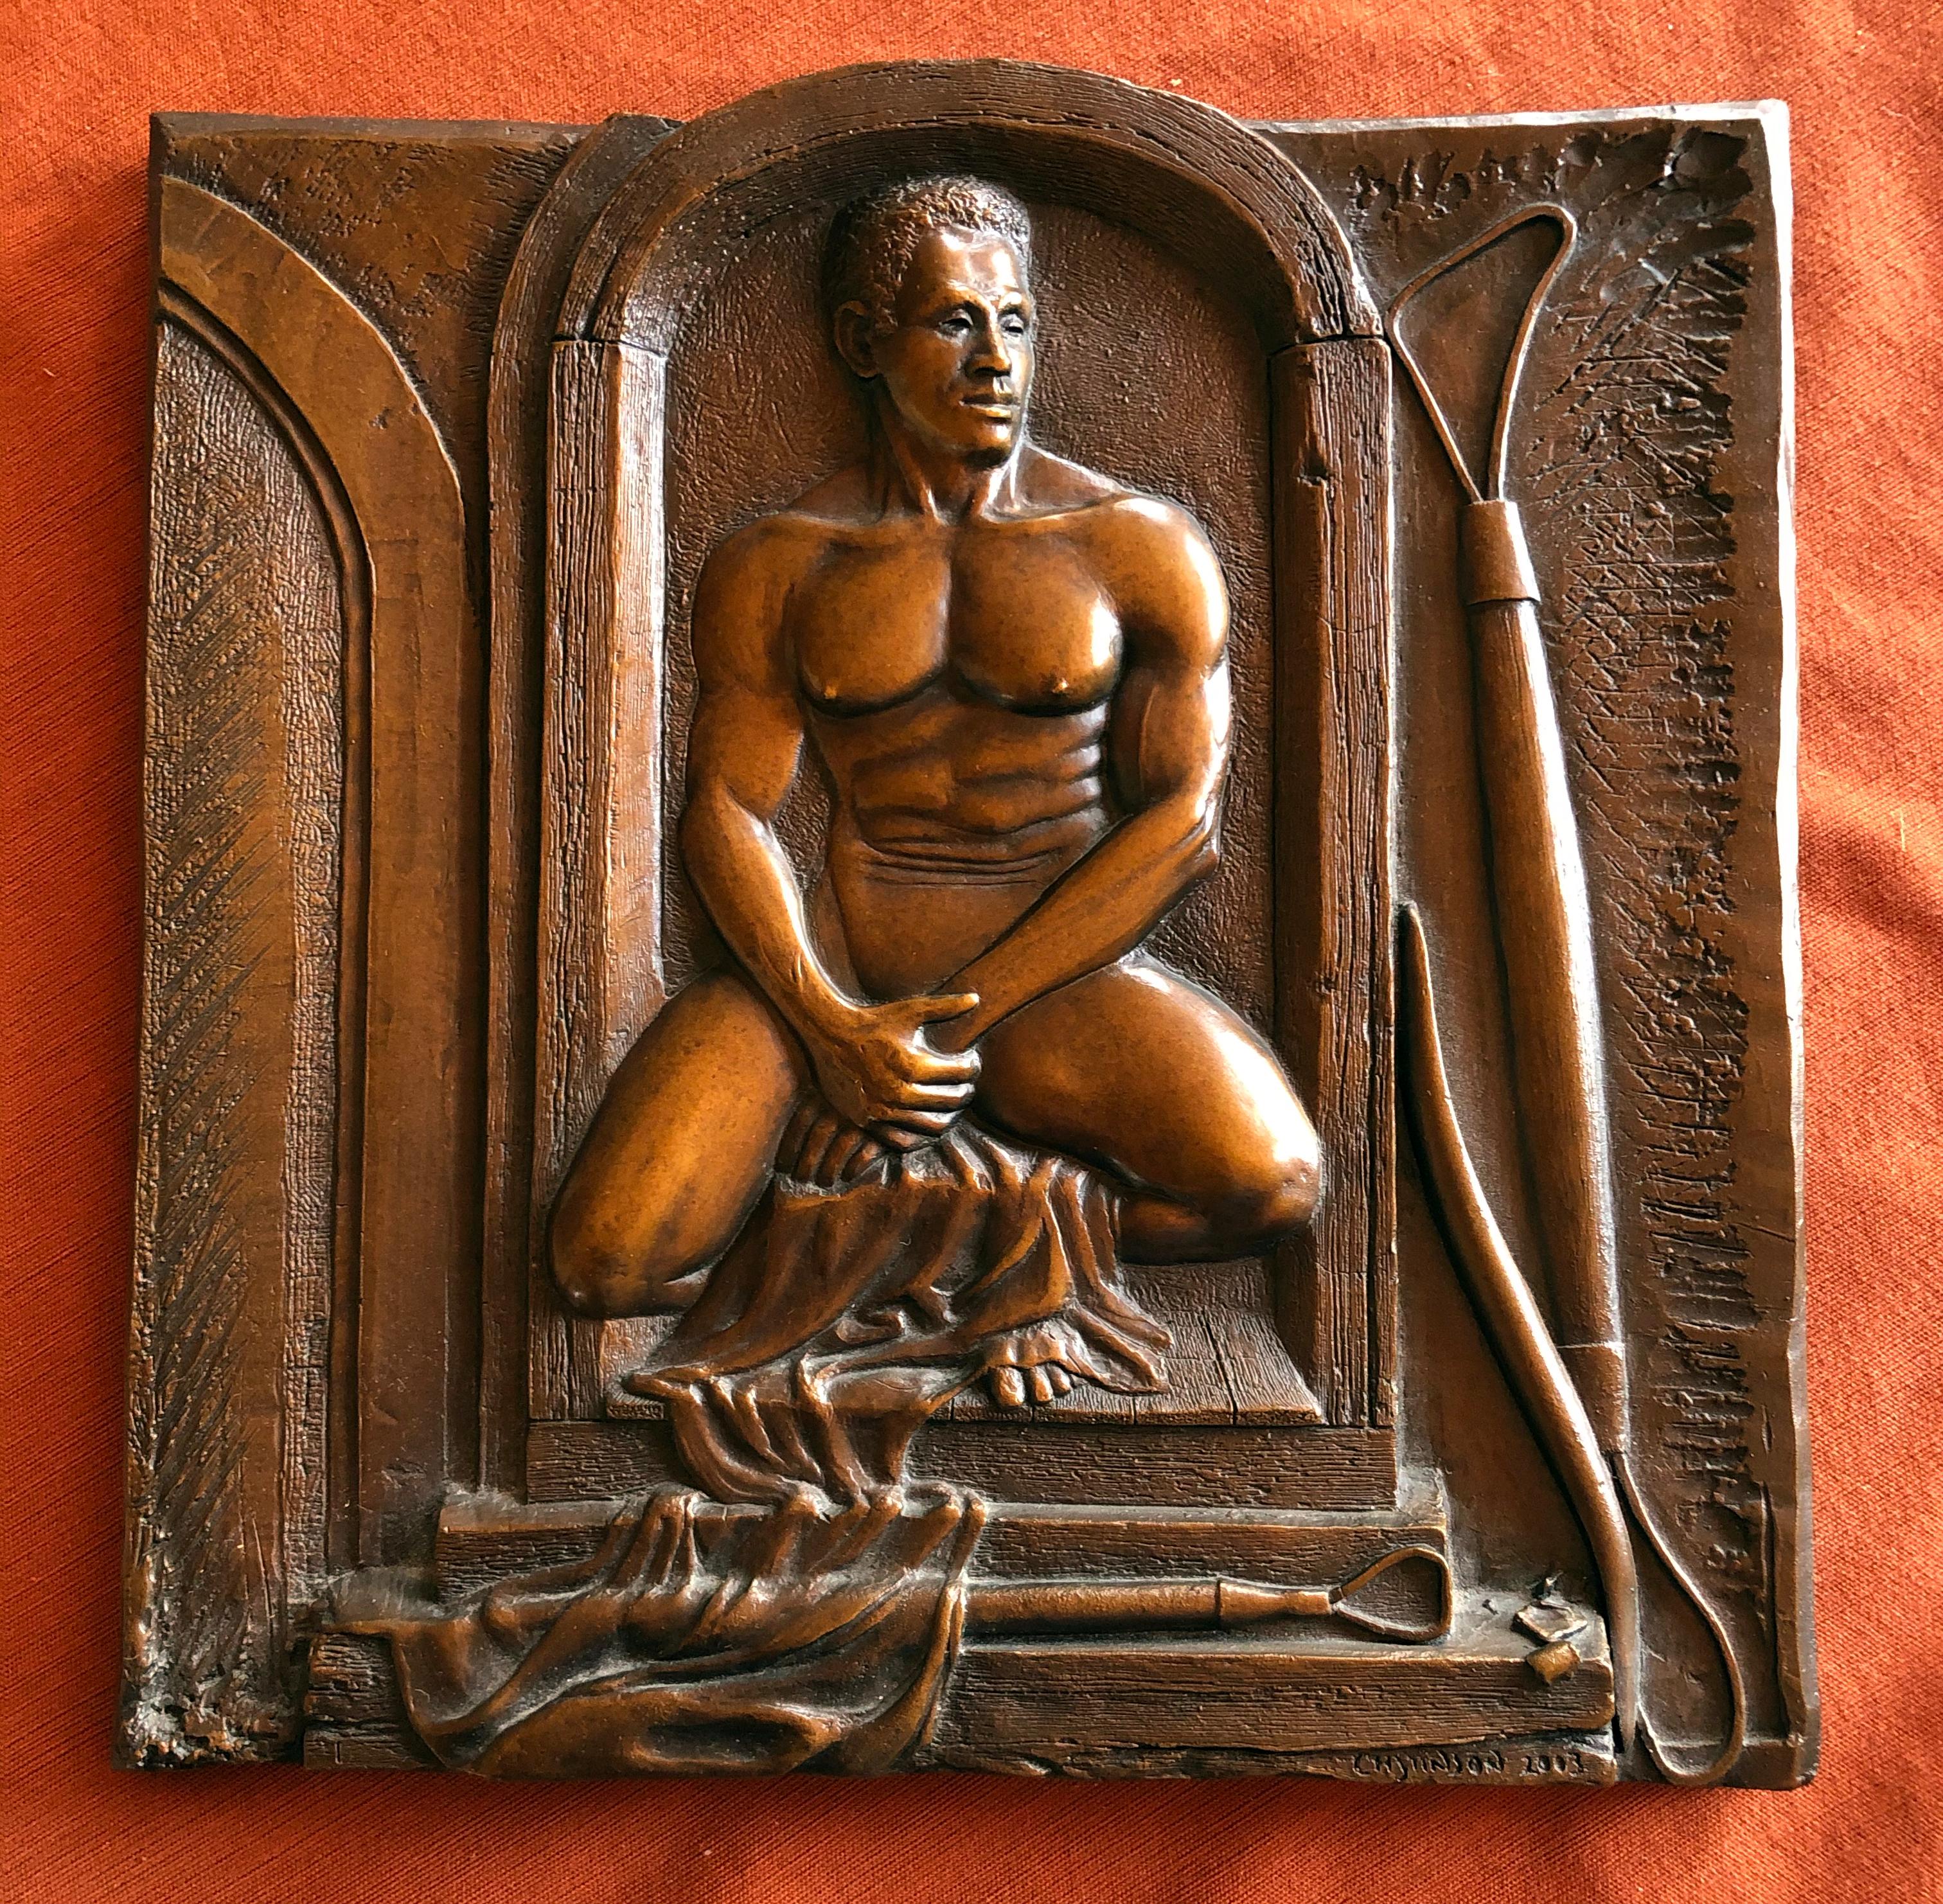 Male nude bronze sculpture by San Francisco artist Charles Stinson. Created for hanging on a wall, or displayed on a stand. Classic male nude with a black model in a trompe l'oeil setting.

Stinson has been exhibiting in solo and group exhibitions